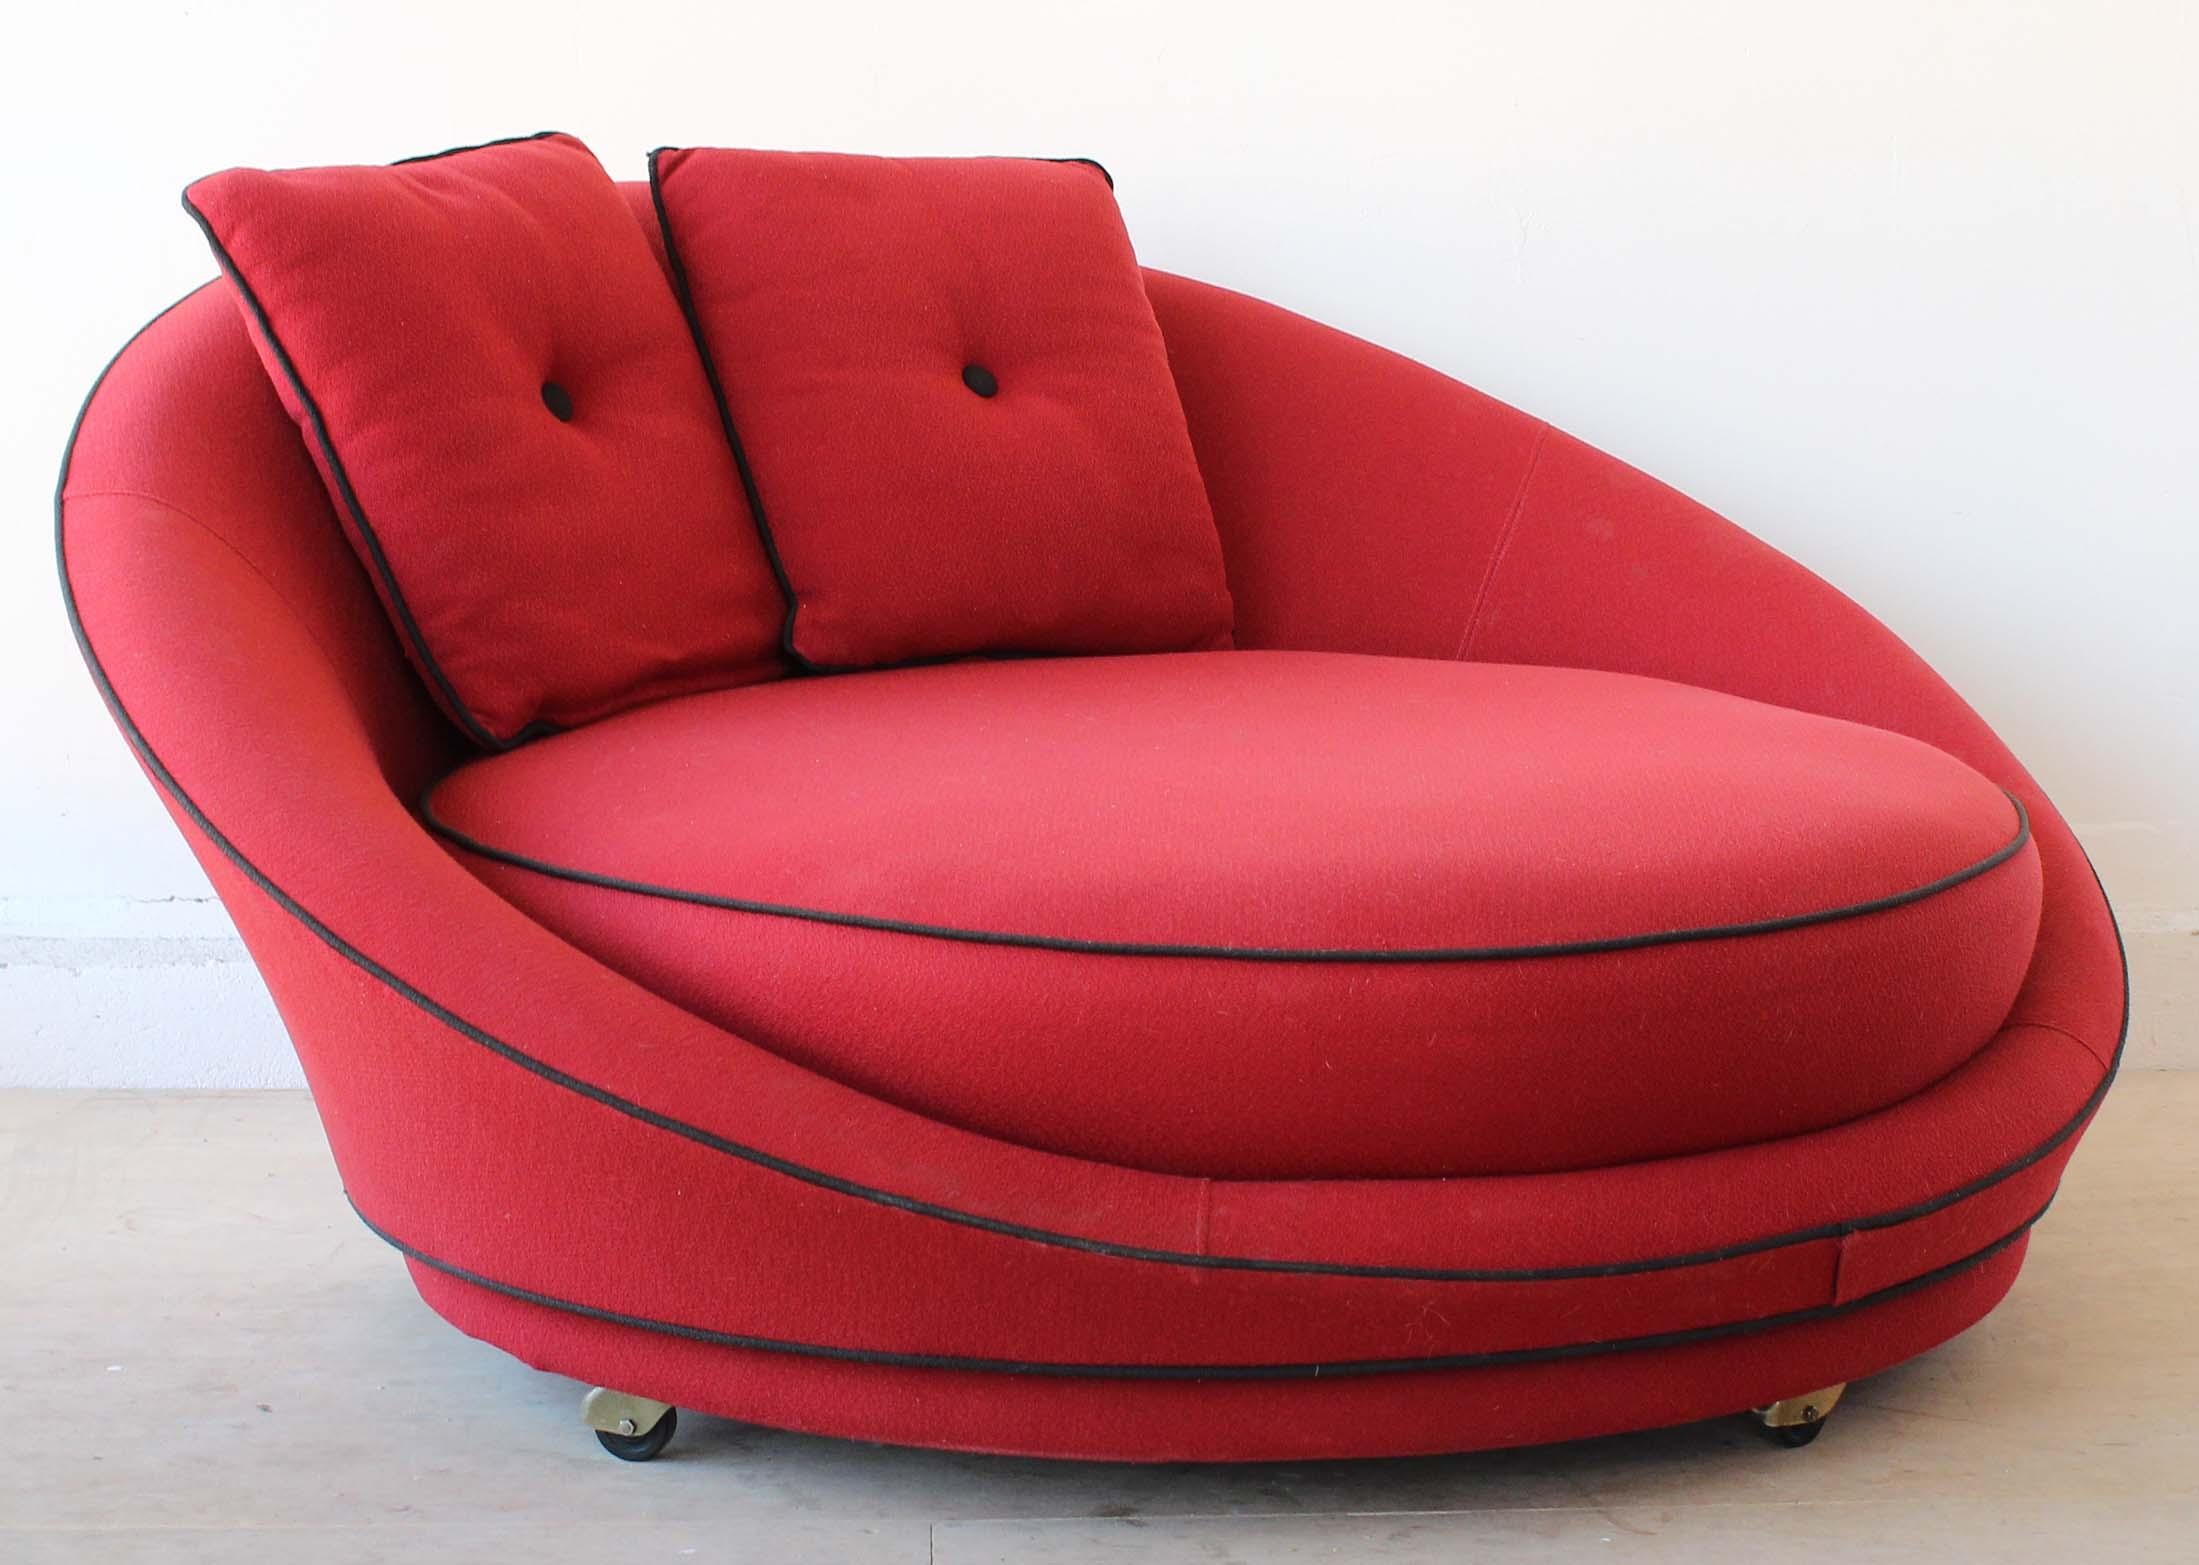 A Classic Milo Baughman for Thayer Coggin round chaise, sofa, settee, loveseat on casters.